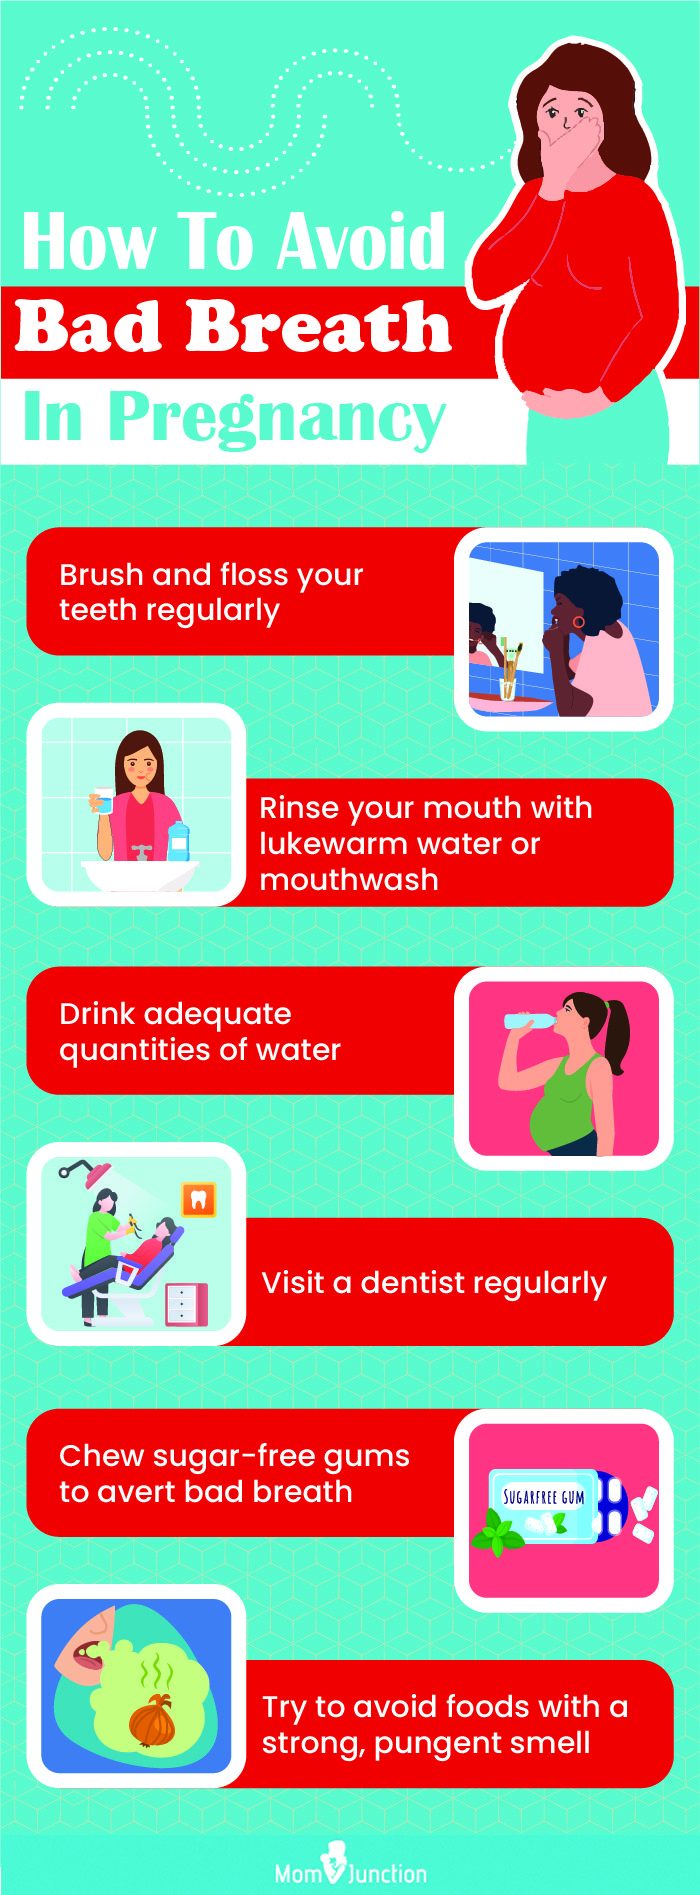 tips to ward off bad breath during pregnancy (infographic)